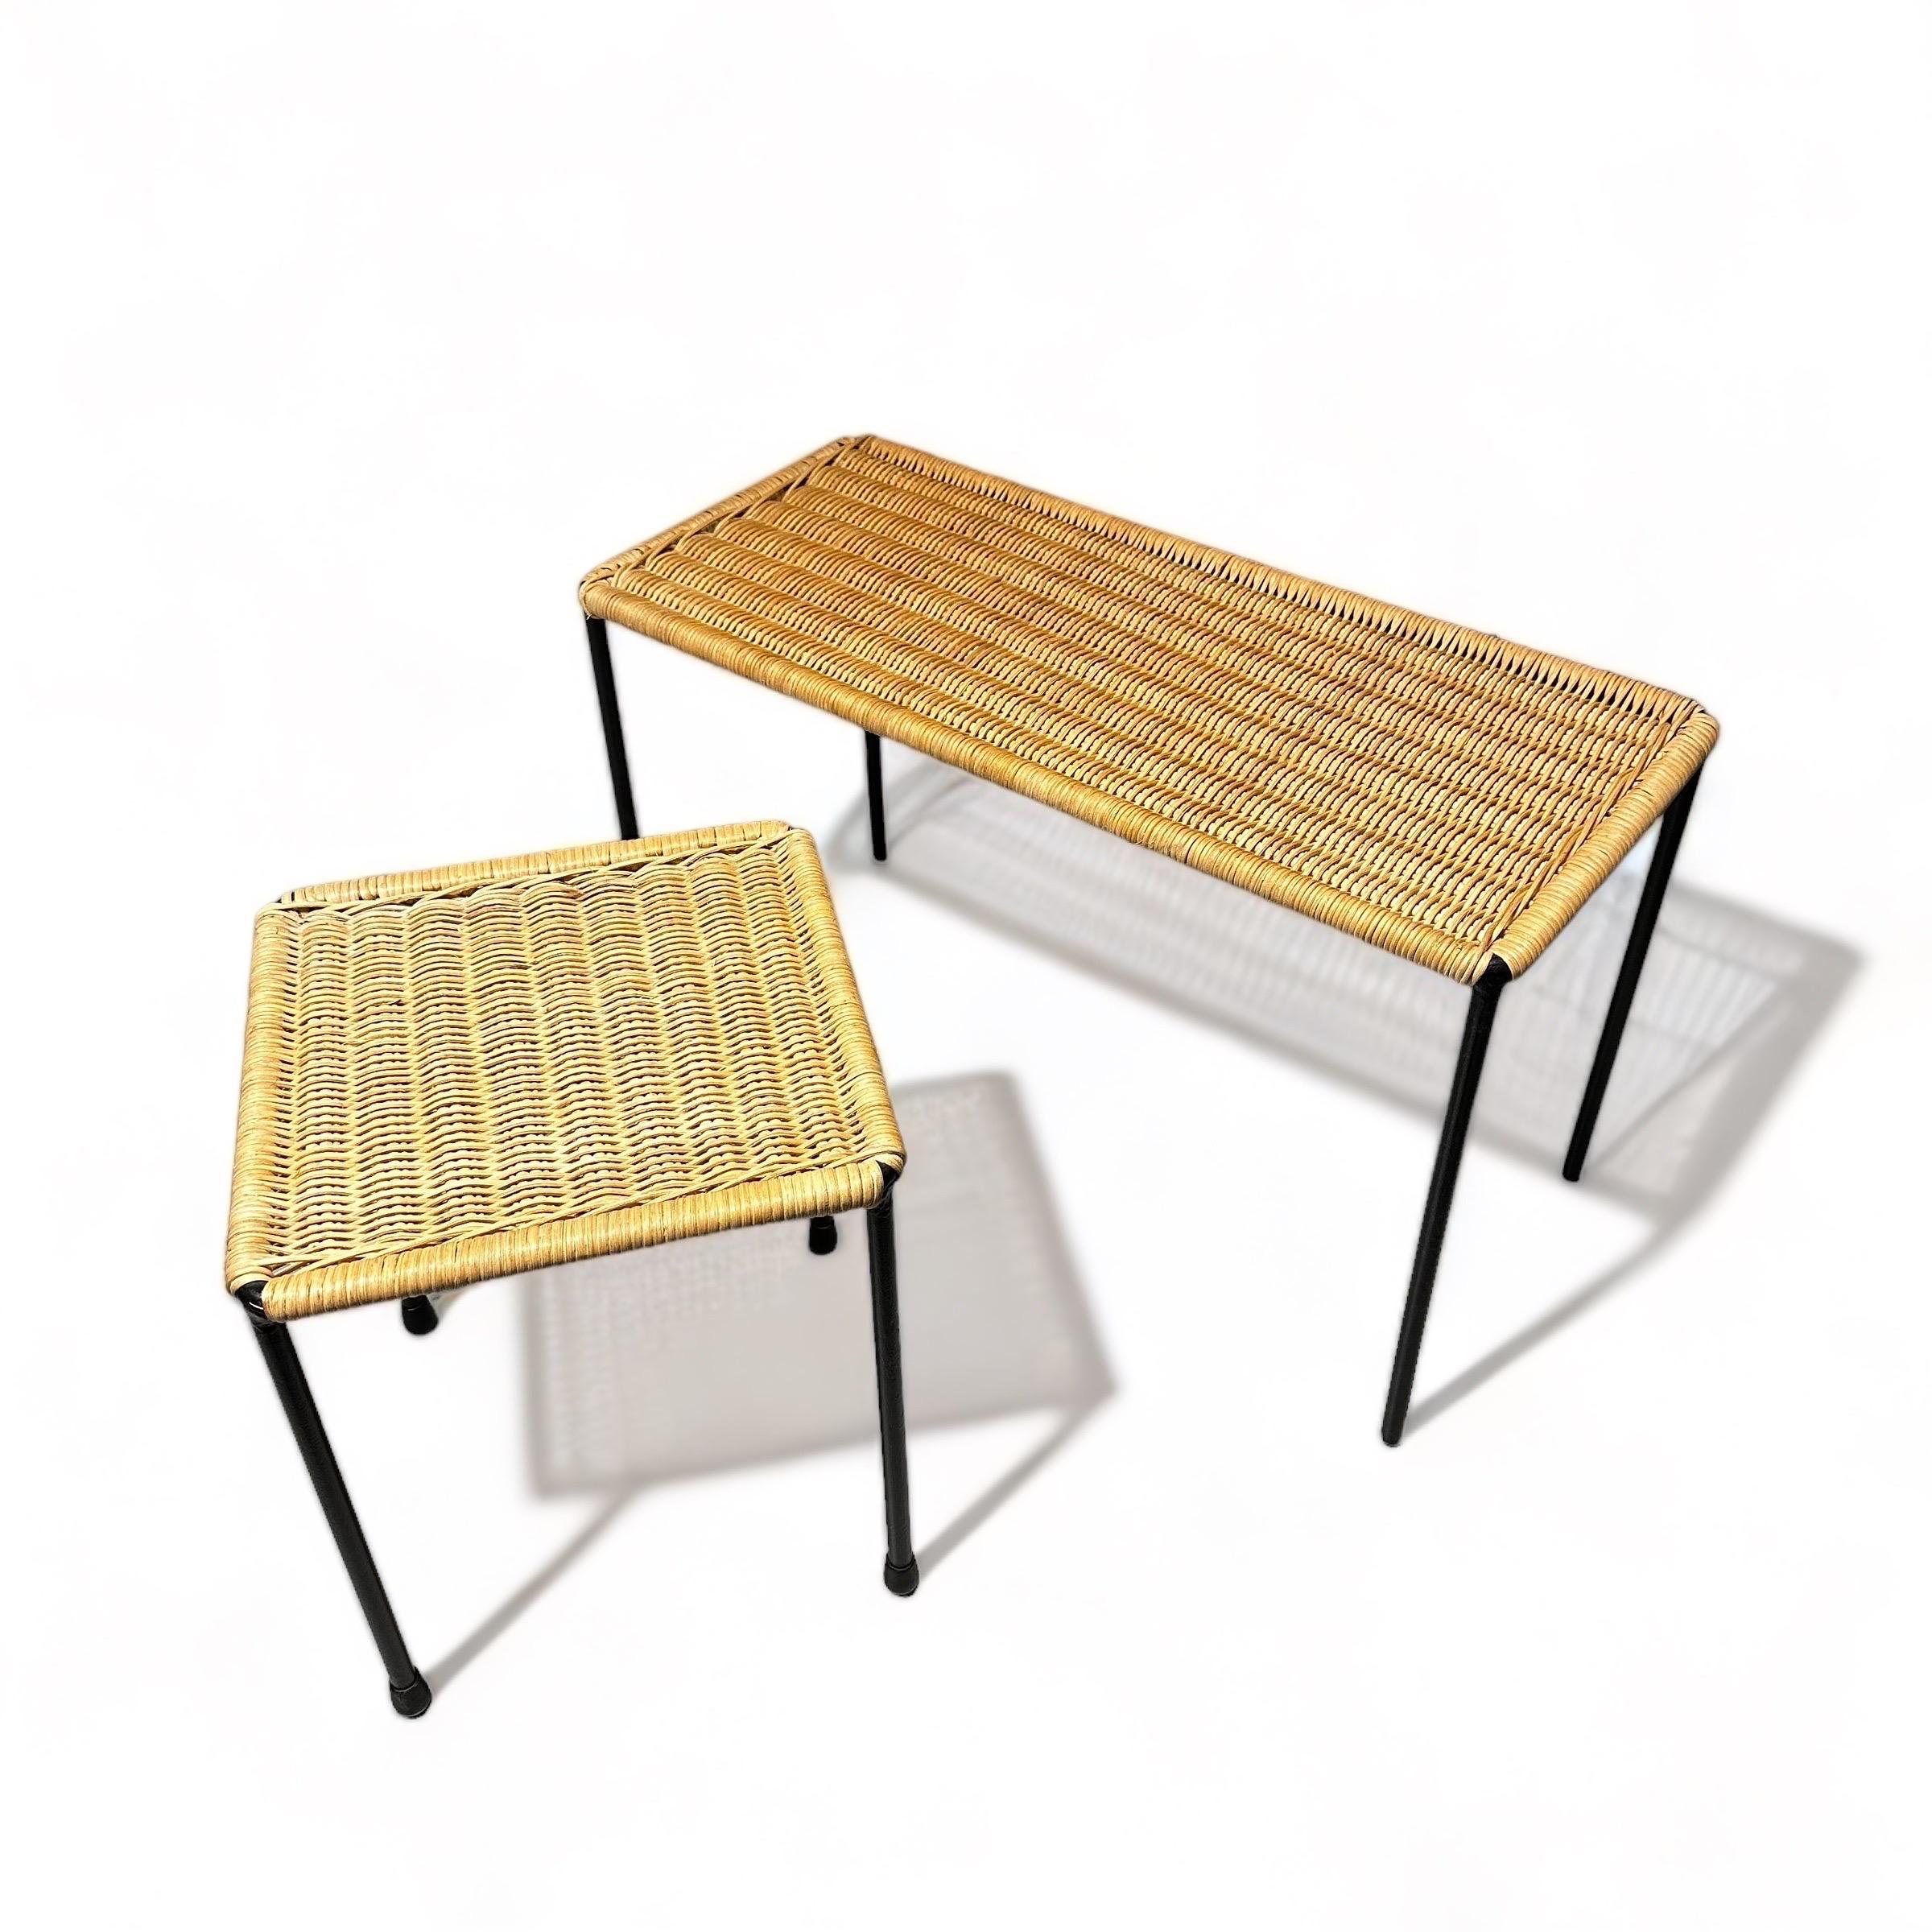 Mid-20th Century Carl Auböck Side Tables with Black Iron and Rattan, Set of Two, Austria 1950s For Sale